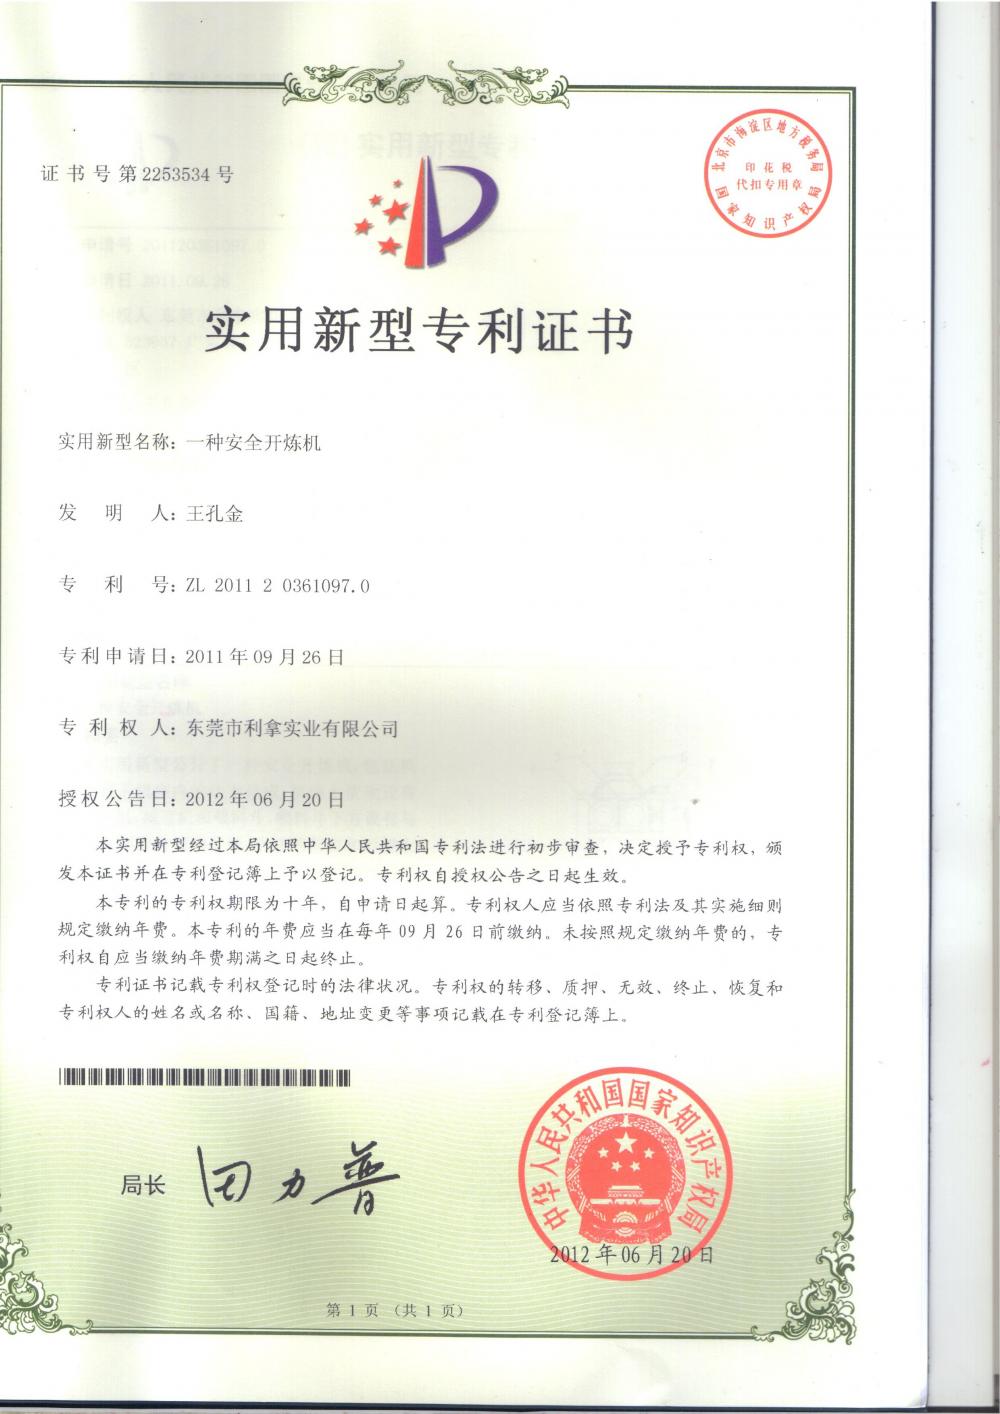 National Patent 4